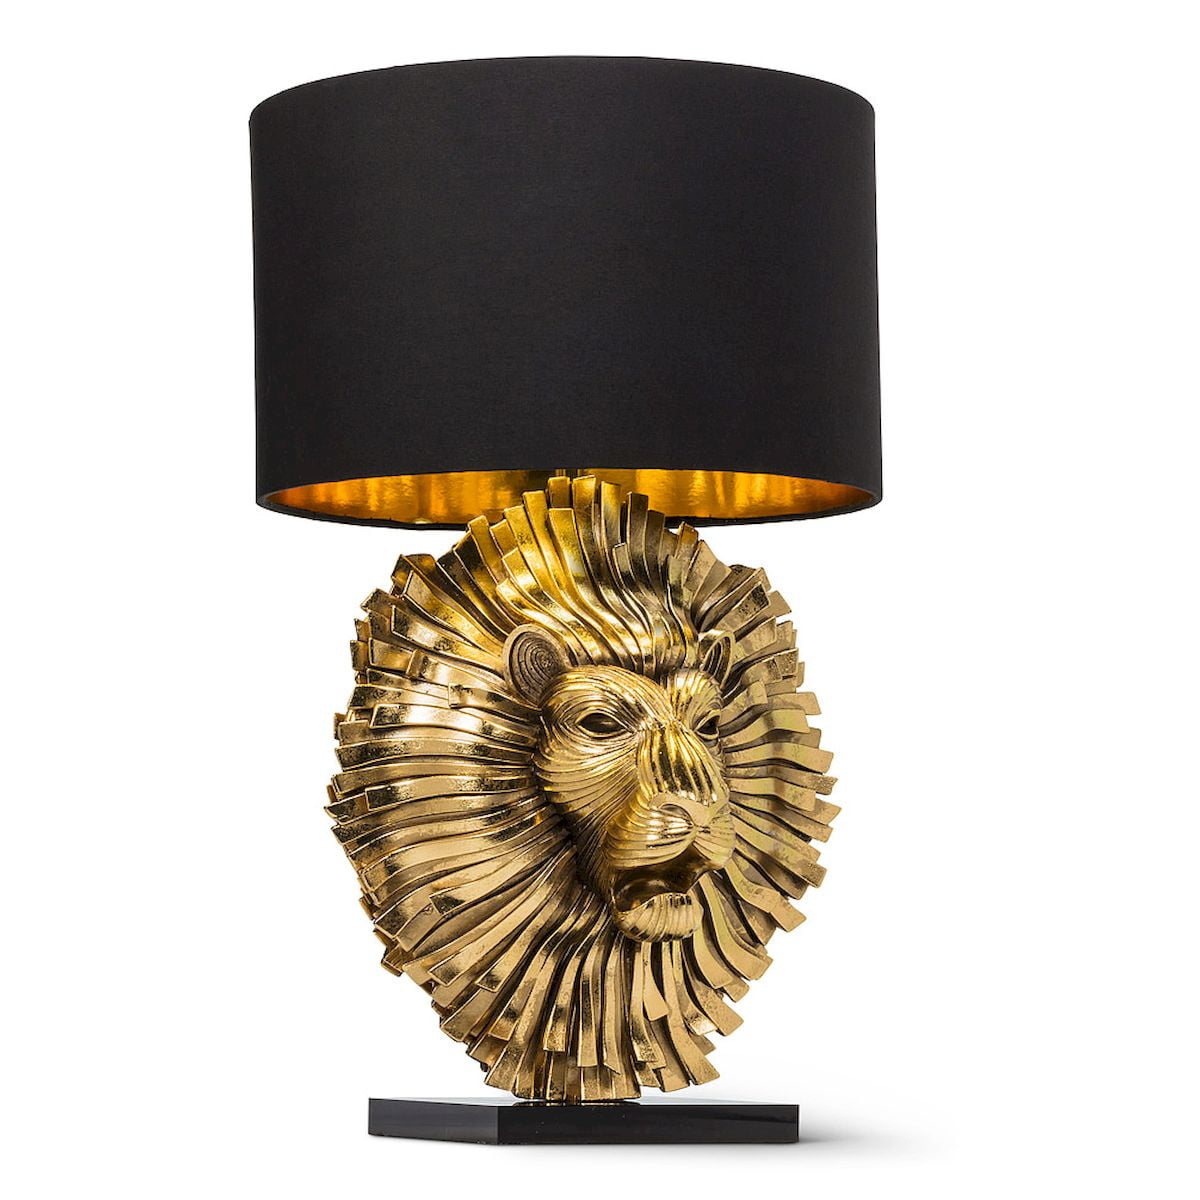 Lion Head Table Lamp Canada, Lion Table Lamp